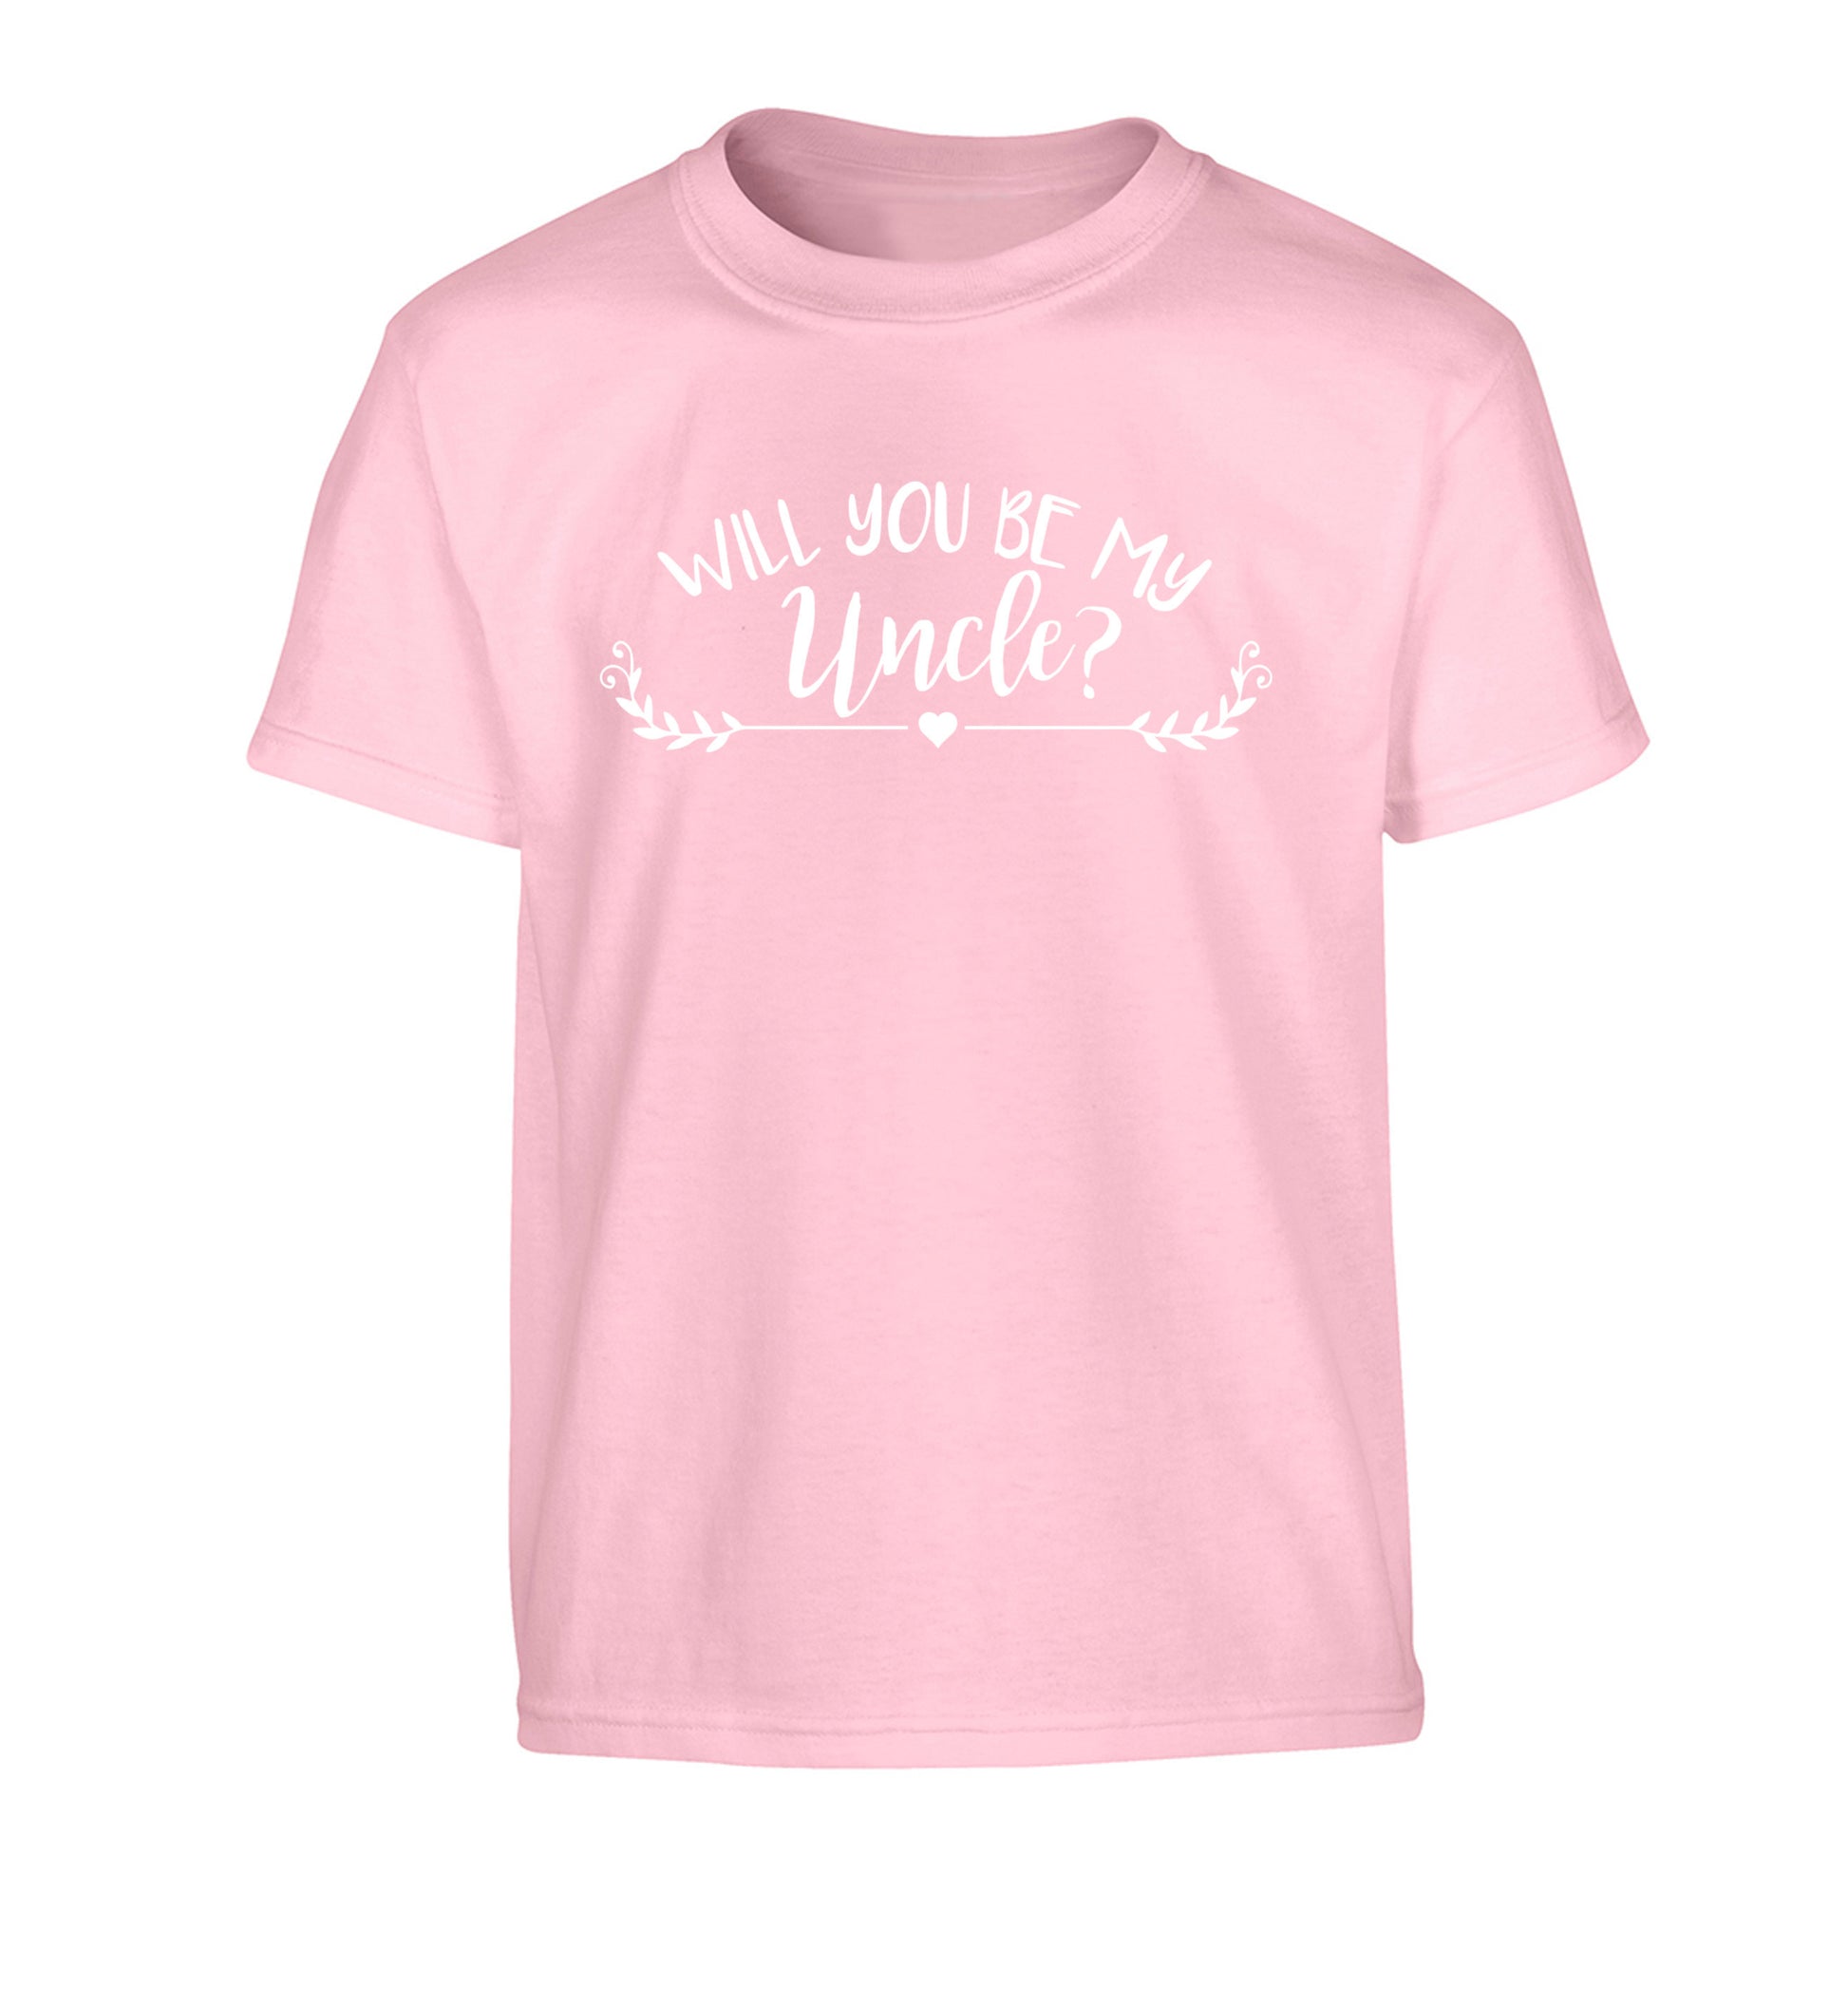 Will you be my uncle? Children's light pink Tshirt 12-14 Years